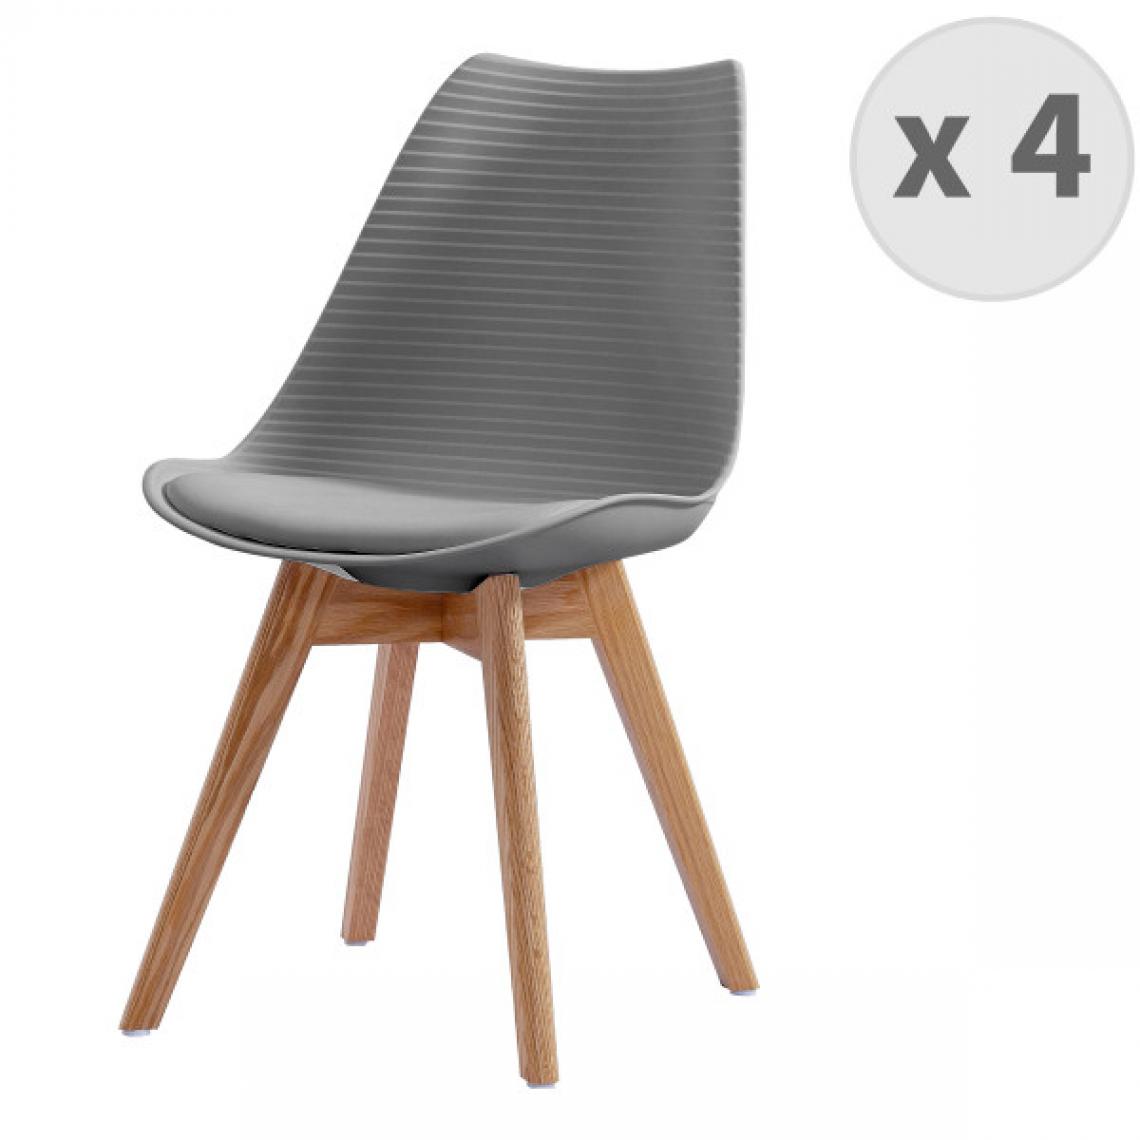 Moloo - BESSY-Chaise scandinave gris pieds chêne (x4) - Chaises